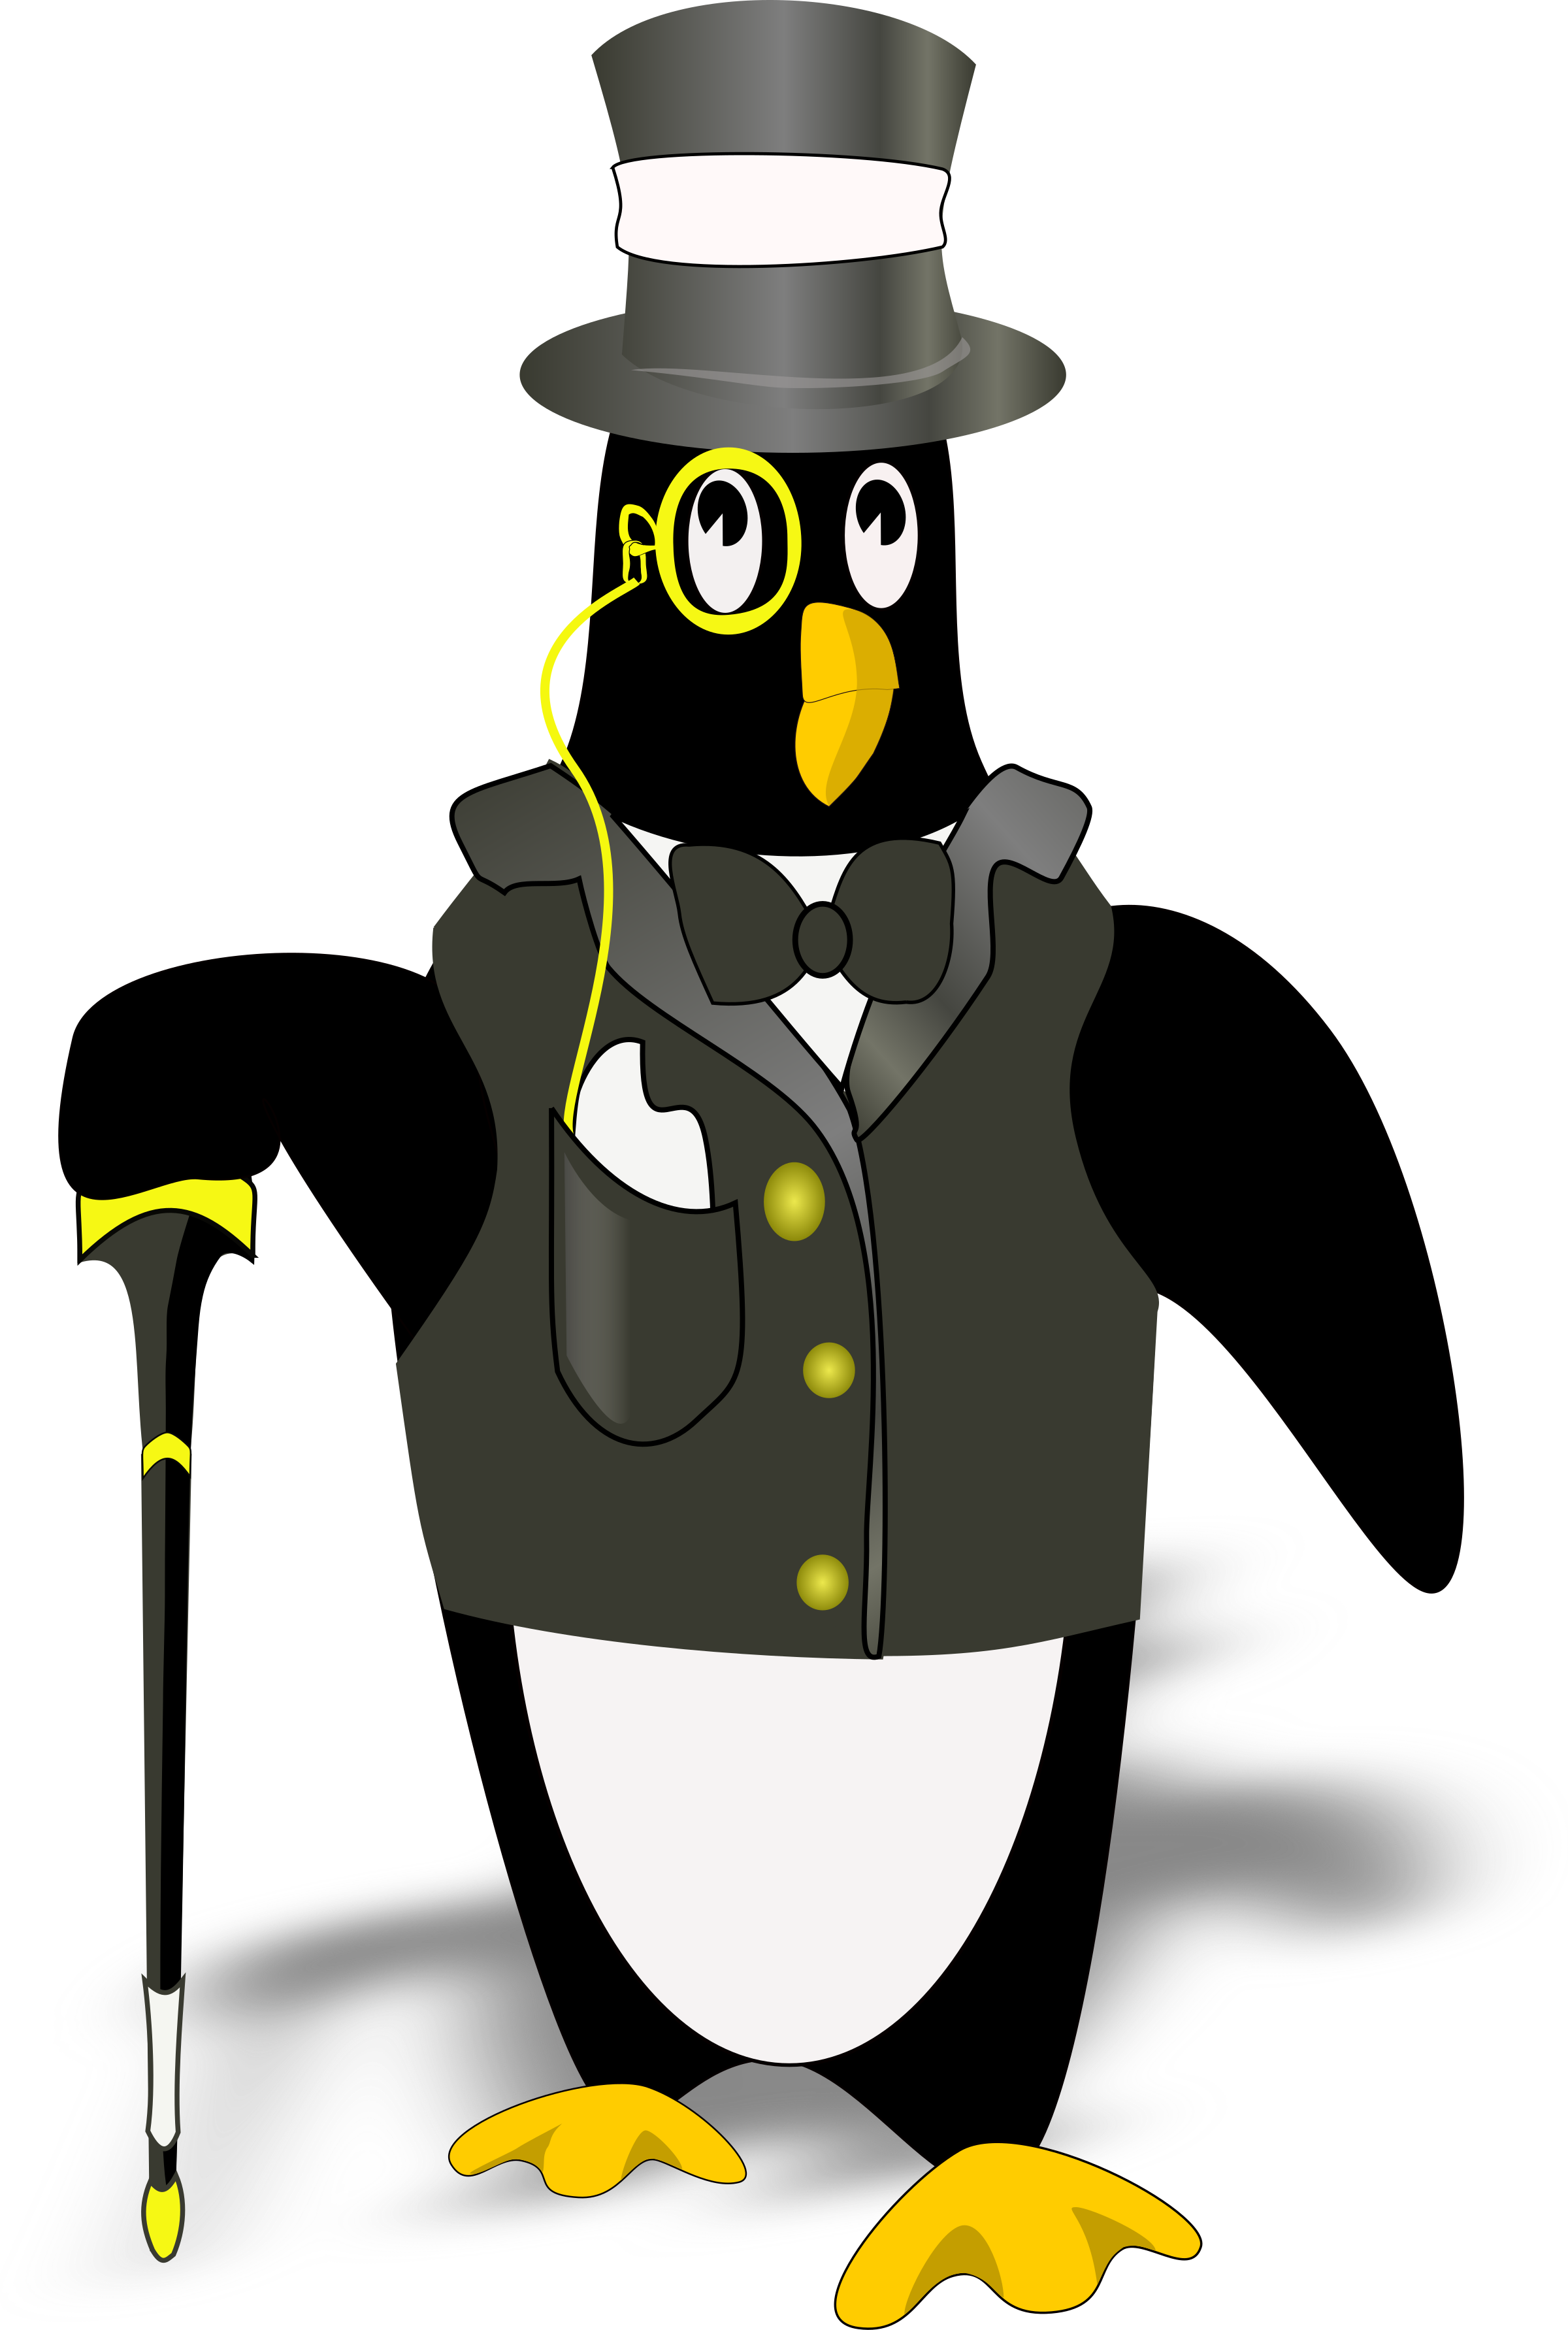 penguin in tux(bordered correctly) Clip arts